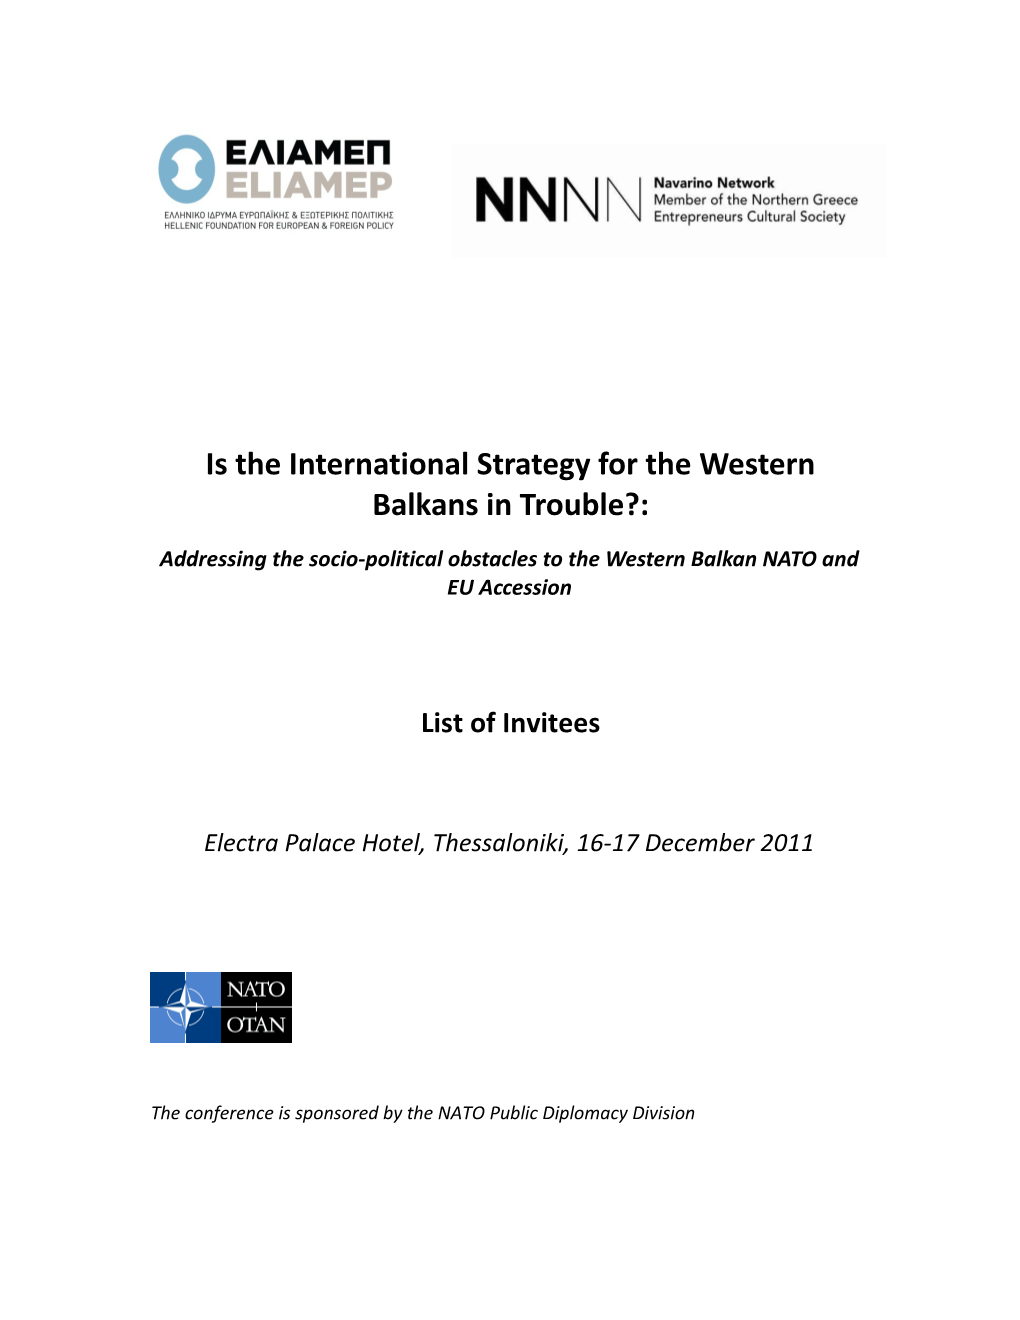 Is the International Strategy for the Western Balkans in Trouble?